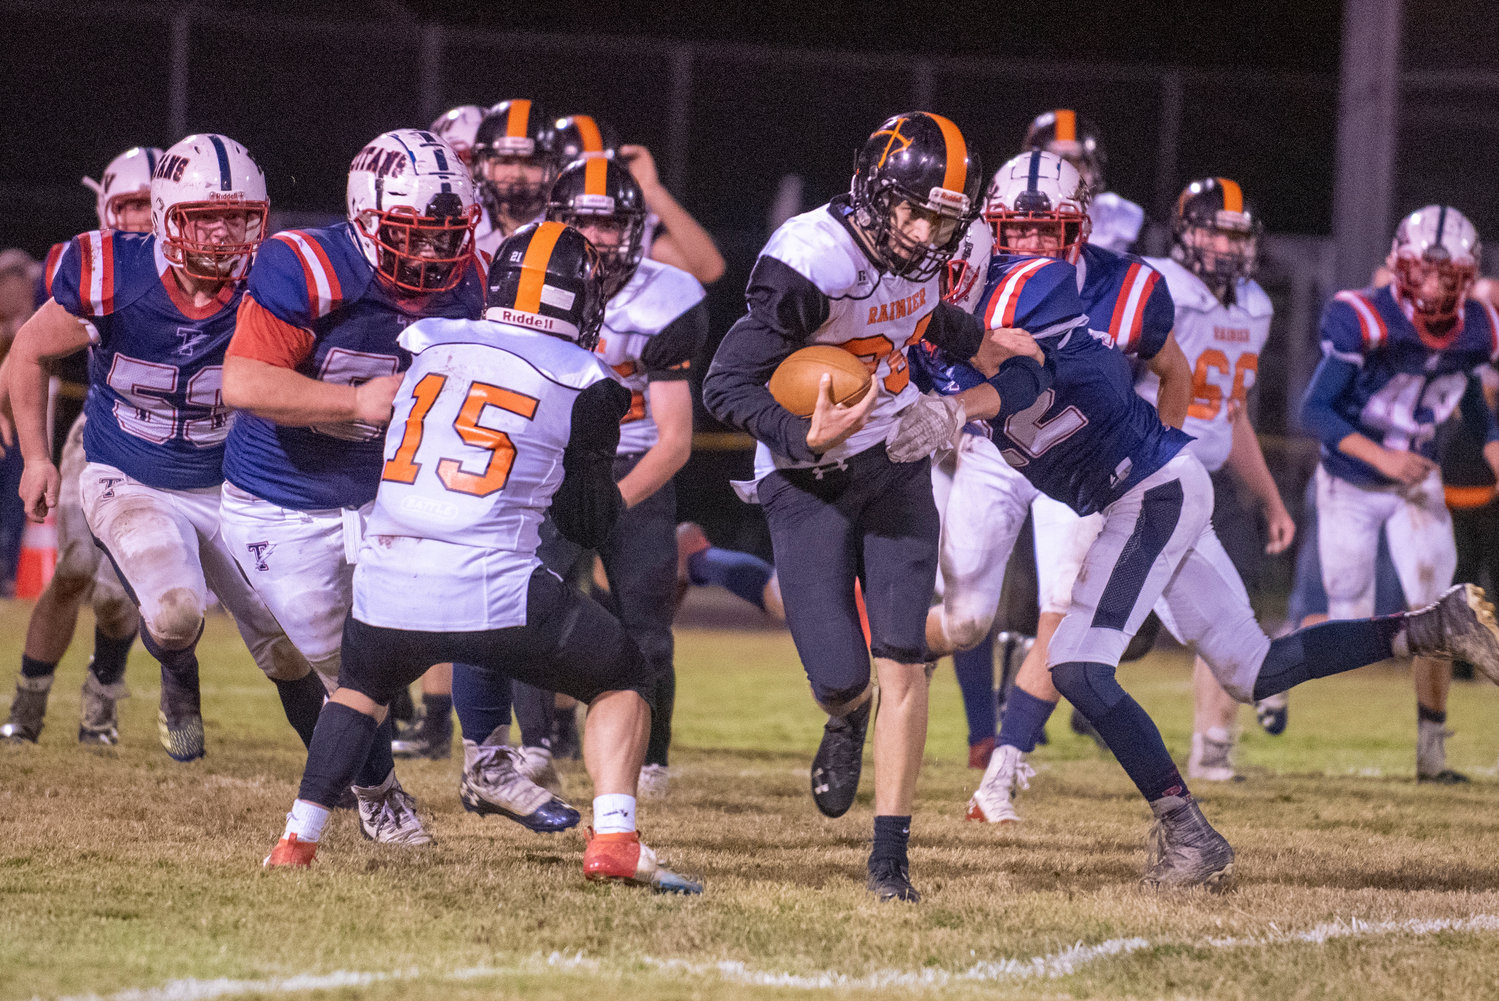 Rainier quarterback Ian Sprouffske (20) rushes up the middle against PWV on Oct. 15, 2021.